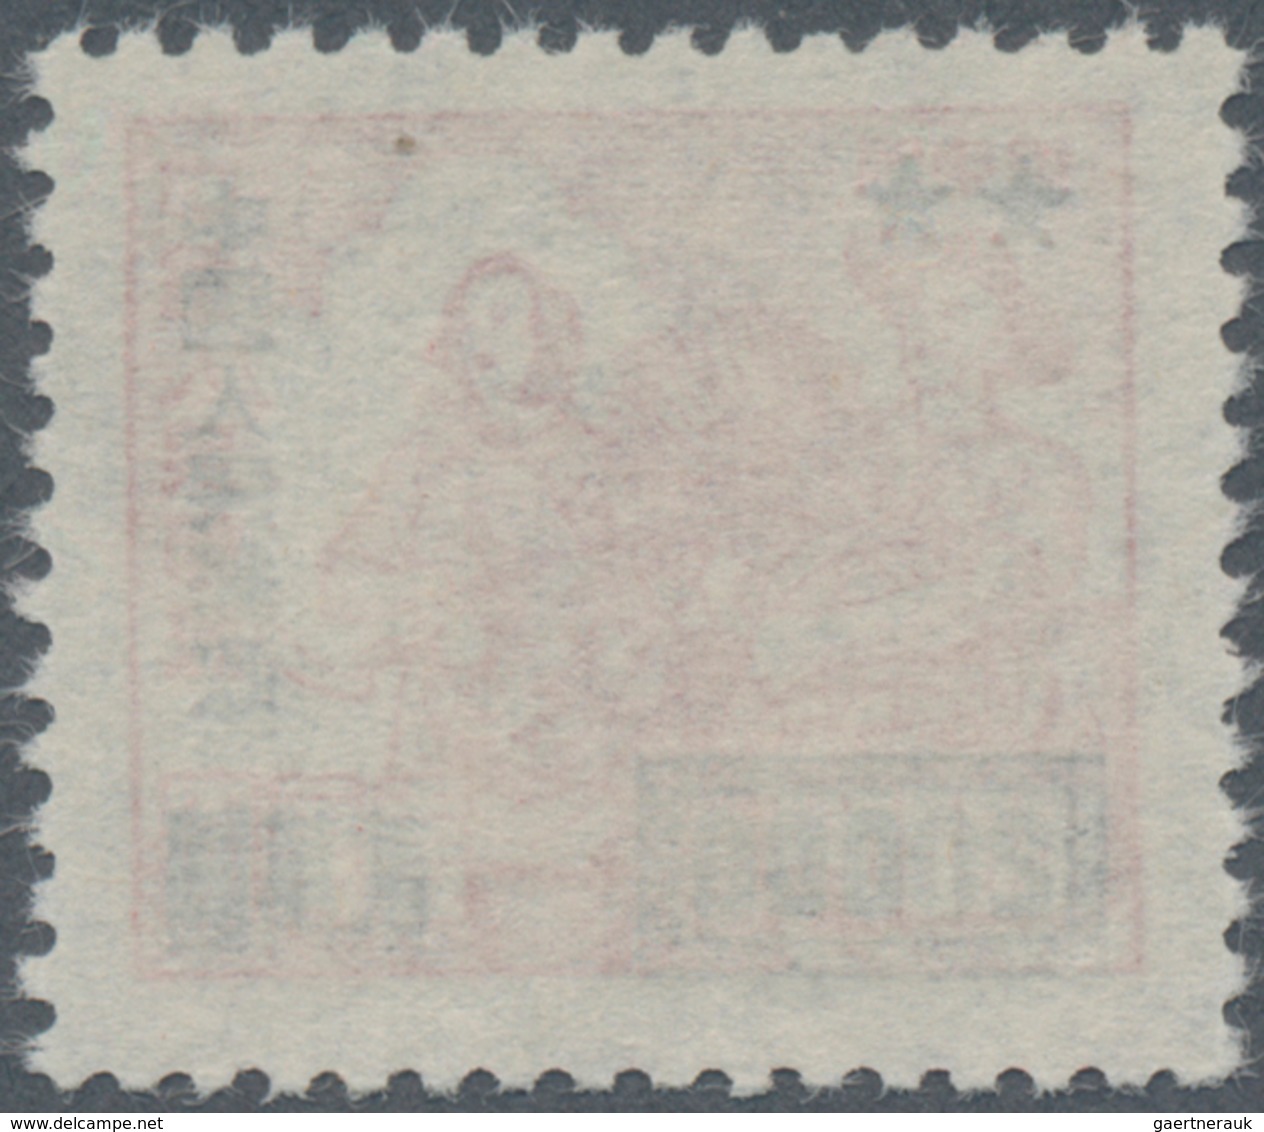 China - Volksrepublik: 1950, Unissued Stamps Of East China Surch., $20,000 On $10,000 Scarlet, Mint - Covers & Documents